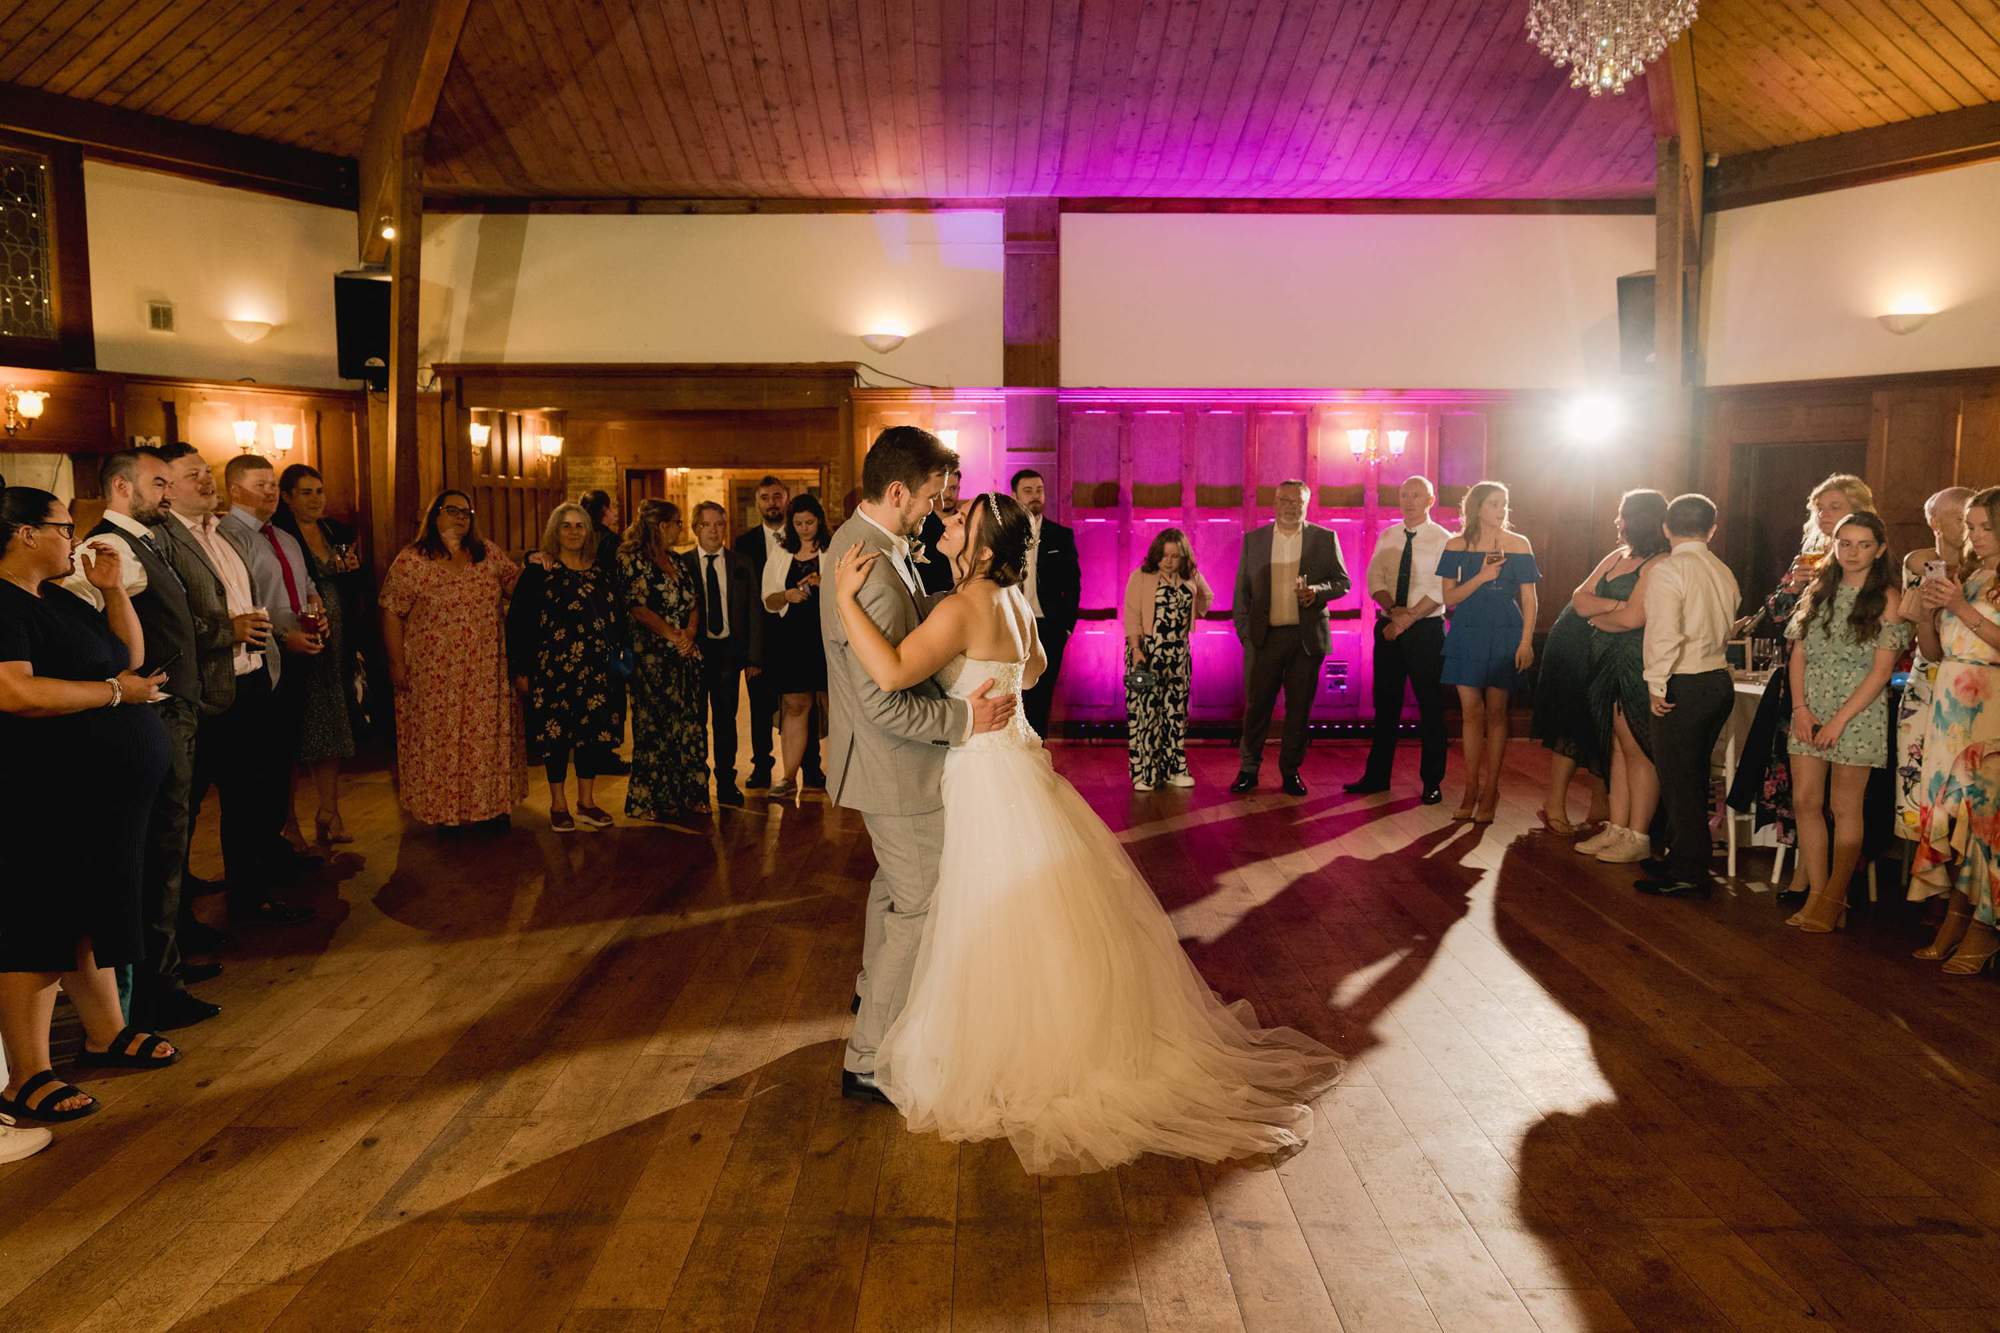 Bride and groom have a first dance in pink lighting at the Ravenswood Hotel in Sussex.